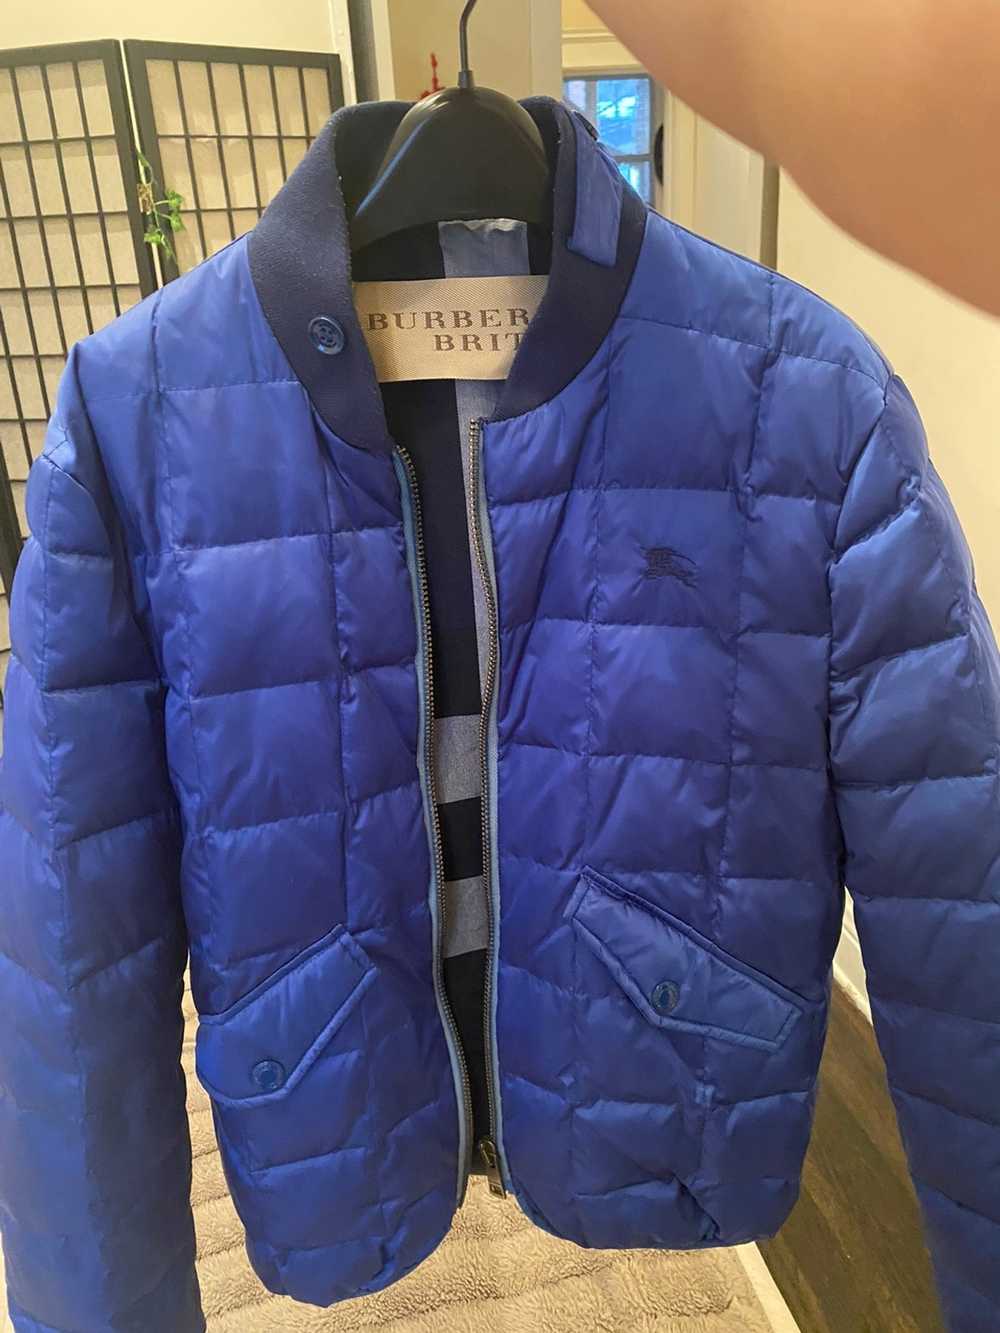 Burberry Burberry Royal Blue Quilted Bomber Jacket - image 7